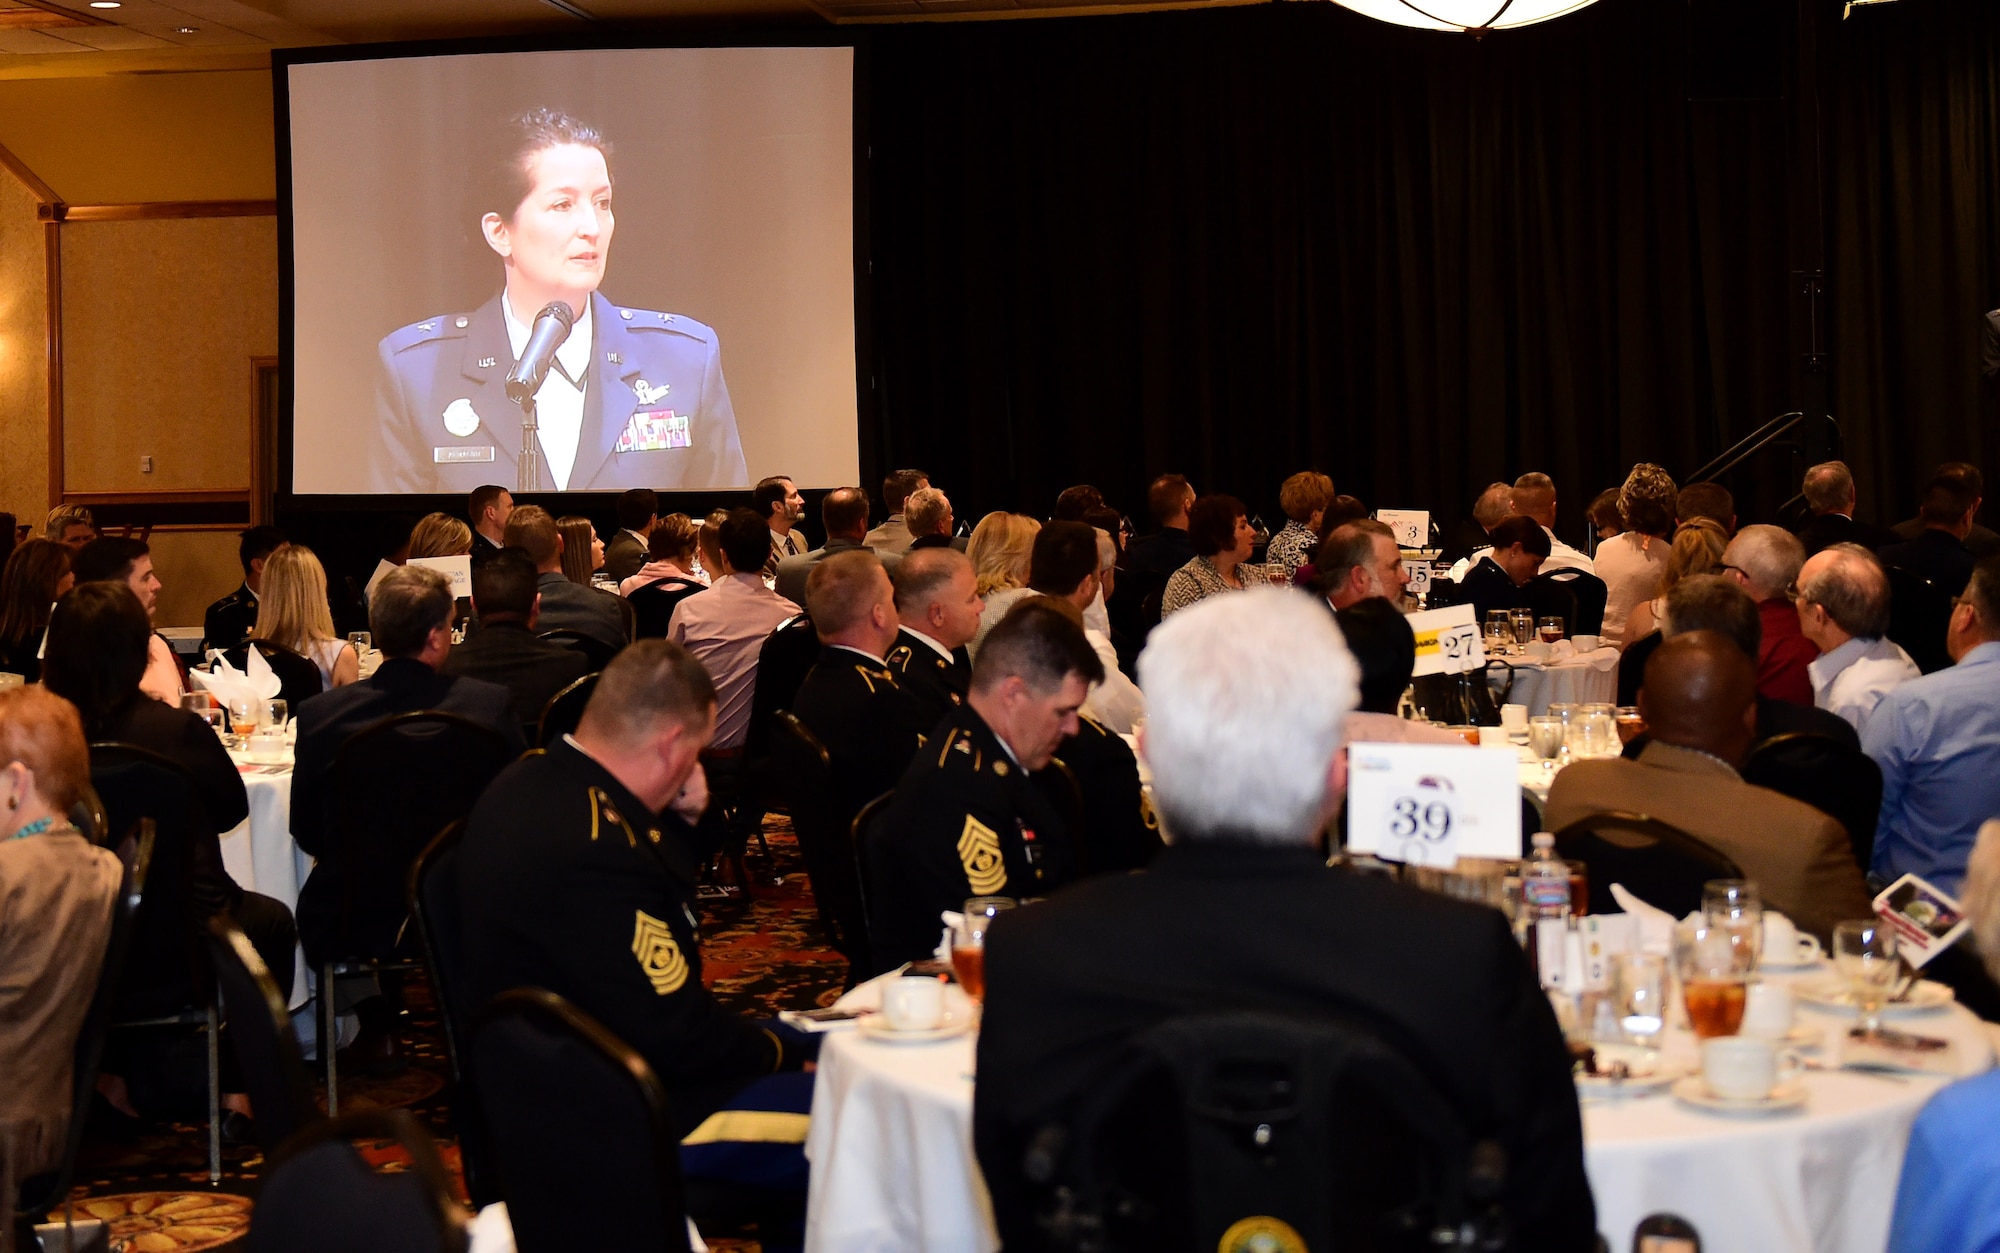 Brig. Gen. Nina Amagno, Director of Strategic Plans, Programs, Requirements and Analysis, Headquarters, Air Force Space Command, speaks May 13, 2016, during the Armed Forces Recognition Luncheon at the Doubletree Stapleton Hotel in Denver. The luncheon honored the outstanding Service members of Aurora, Denver, and Northern Colorado.. (U.S. Air Force photo by Airman 1st Class Gabrielle Spradling/Released)